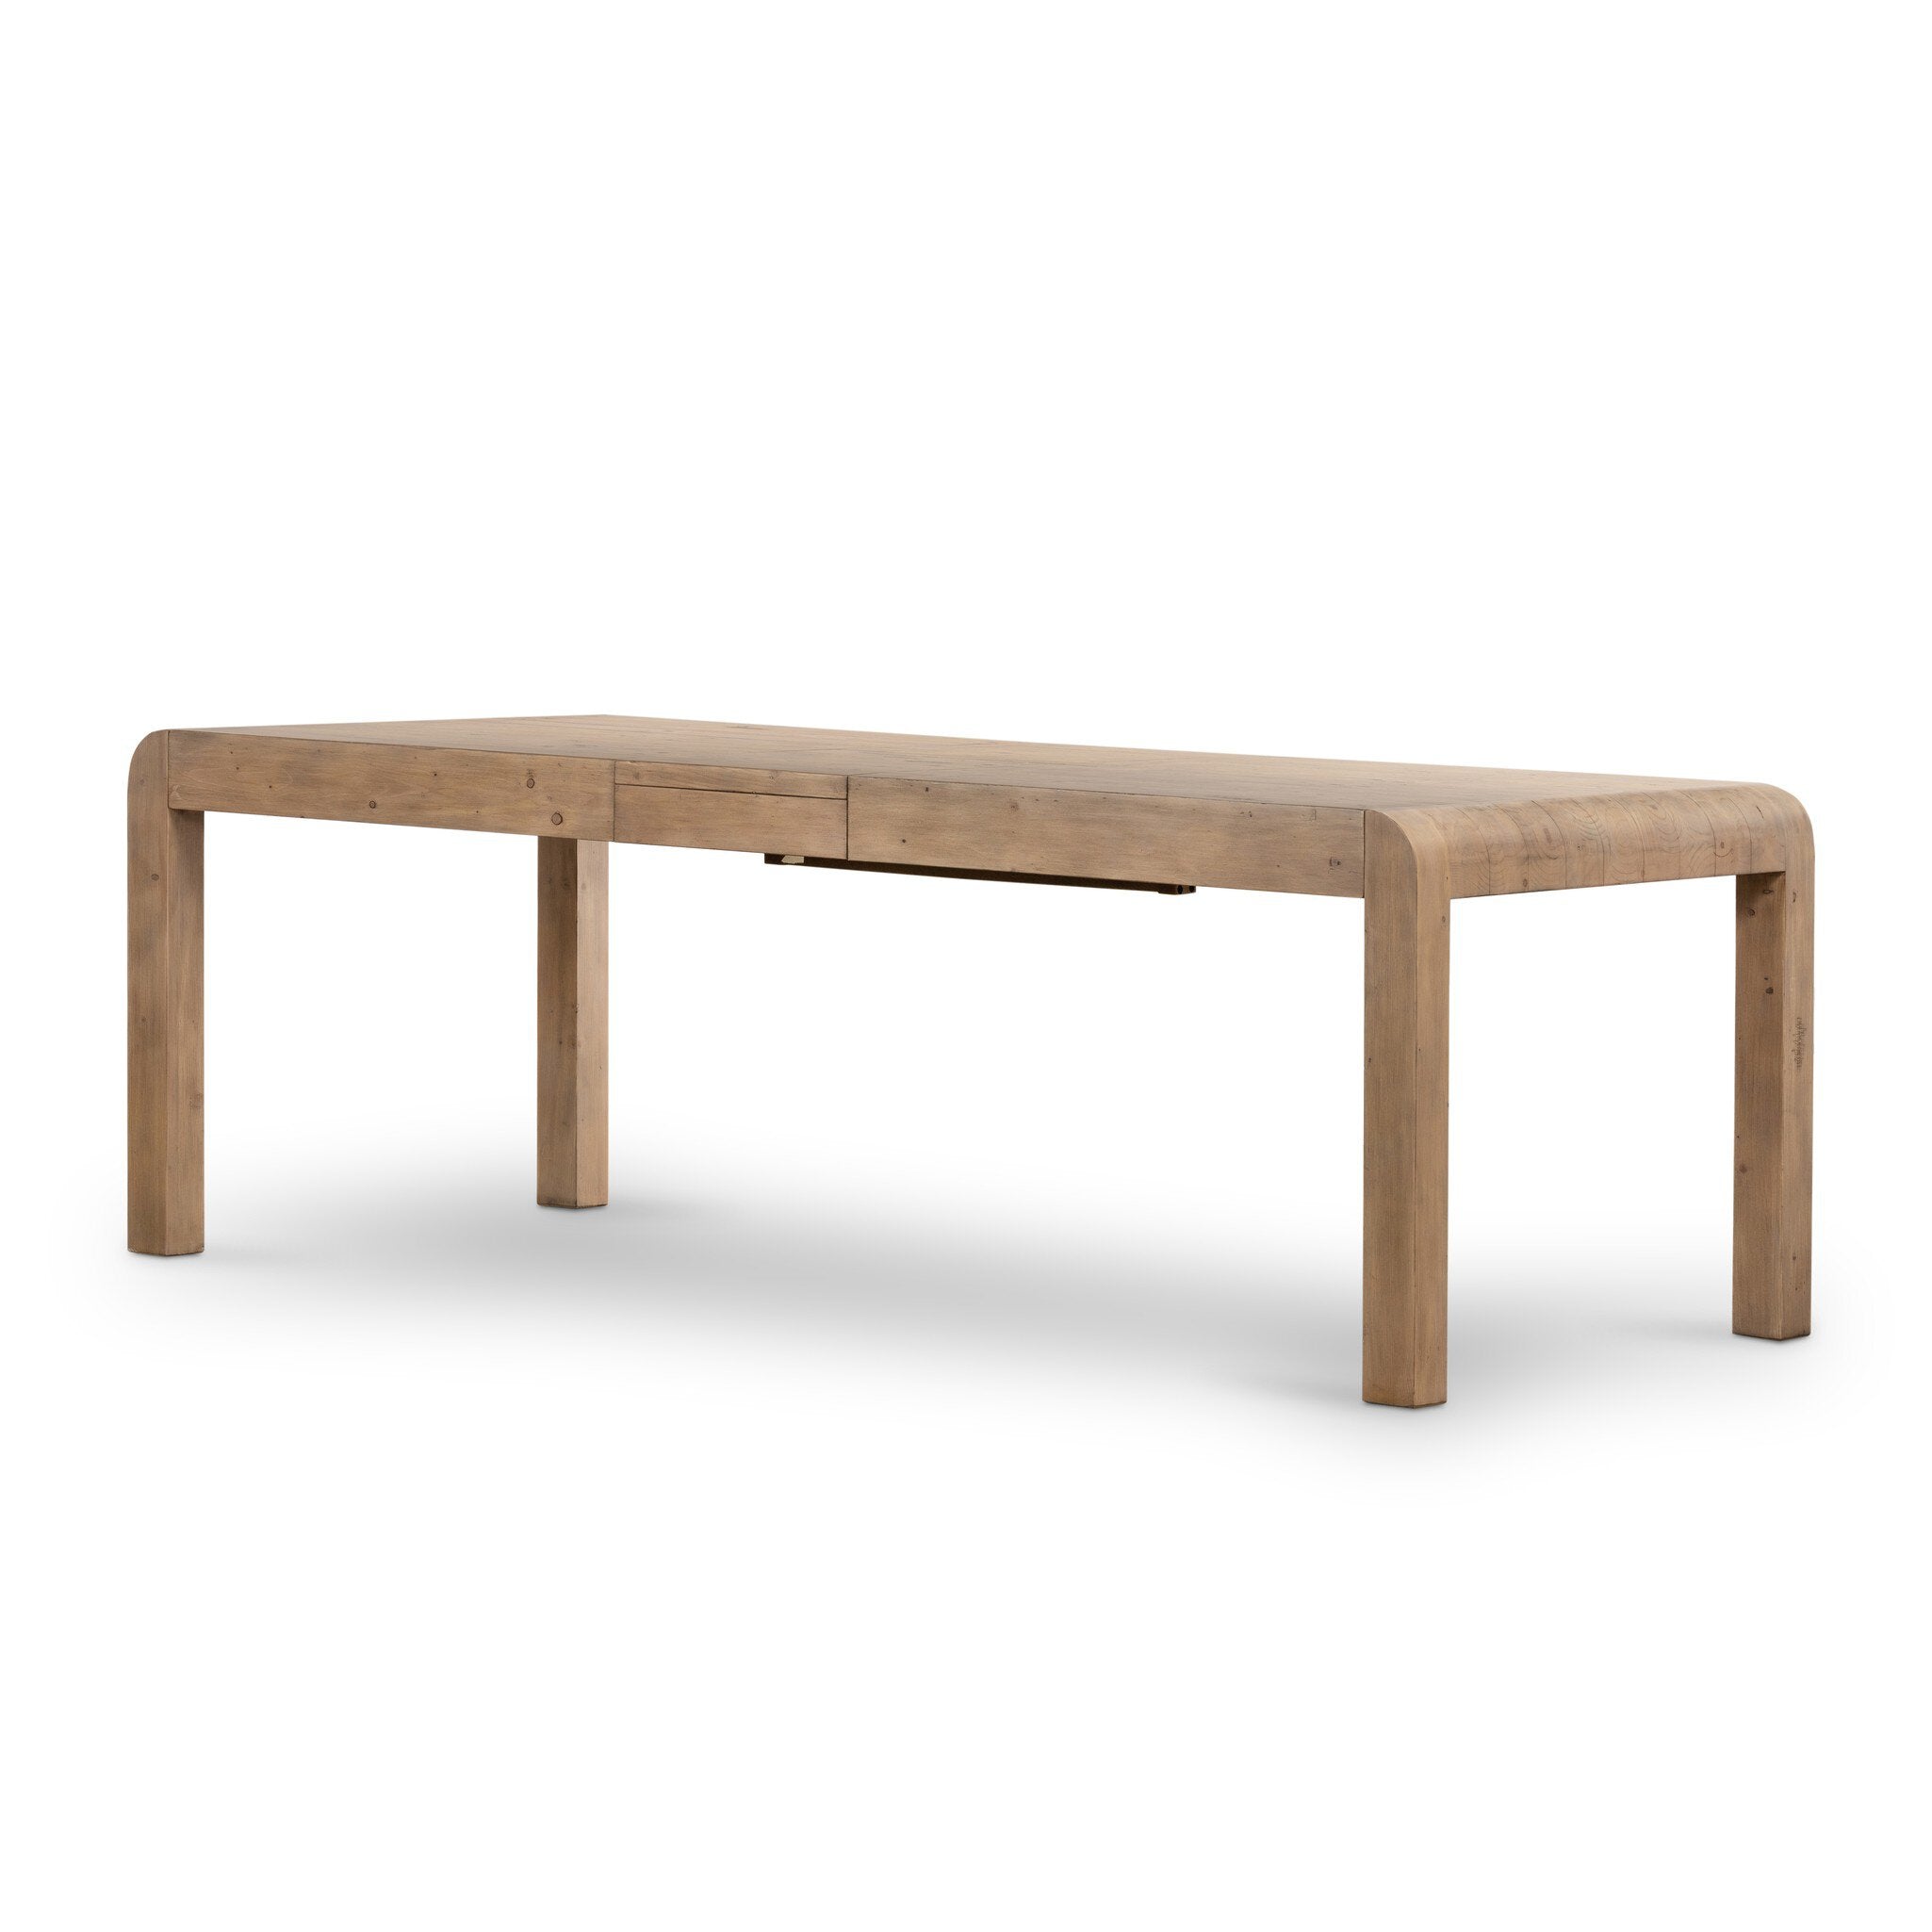 Everson 71" Extension Dining Table - Scrubbed Teak